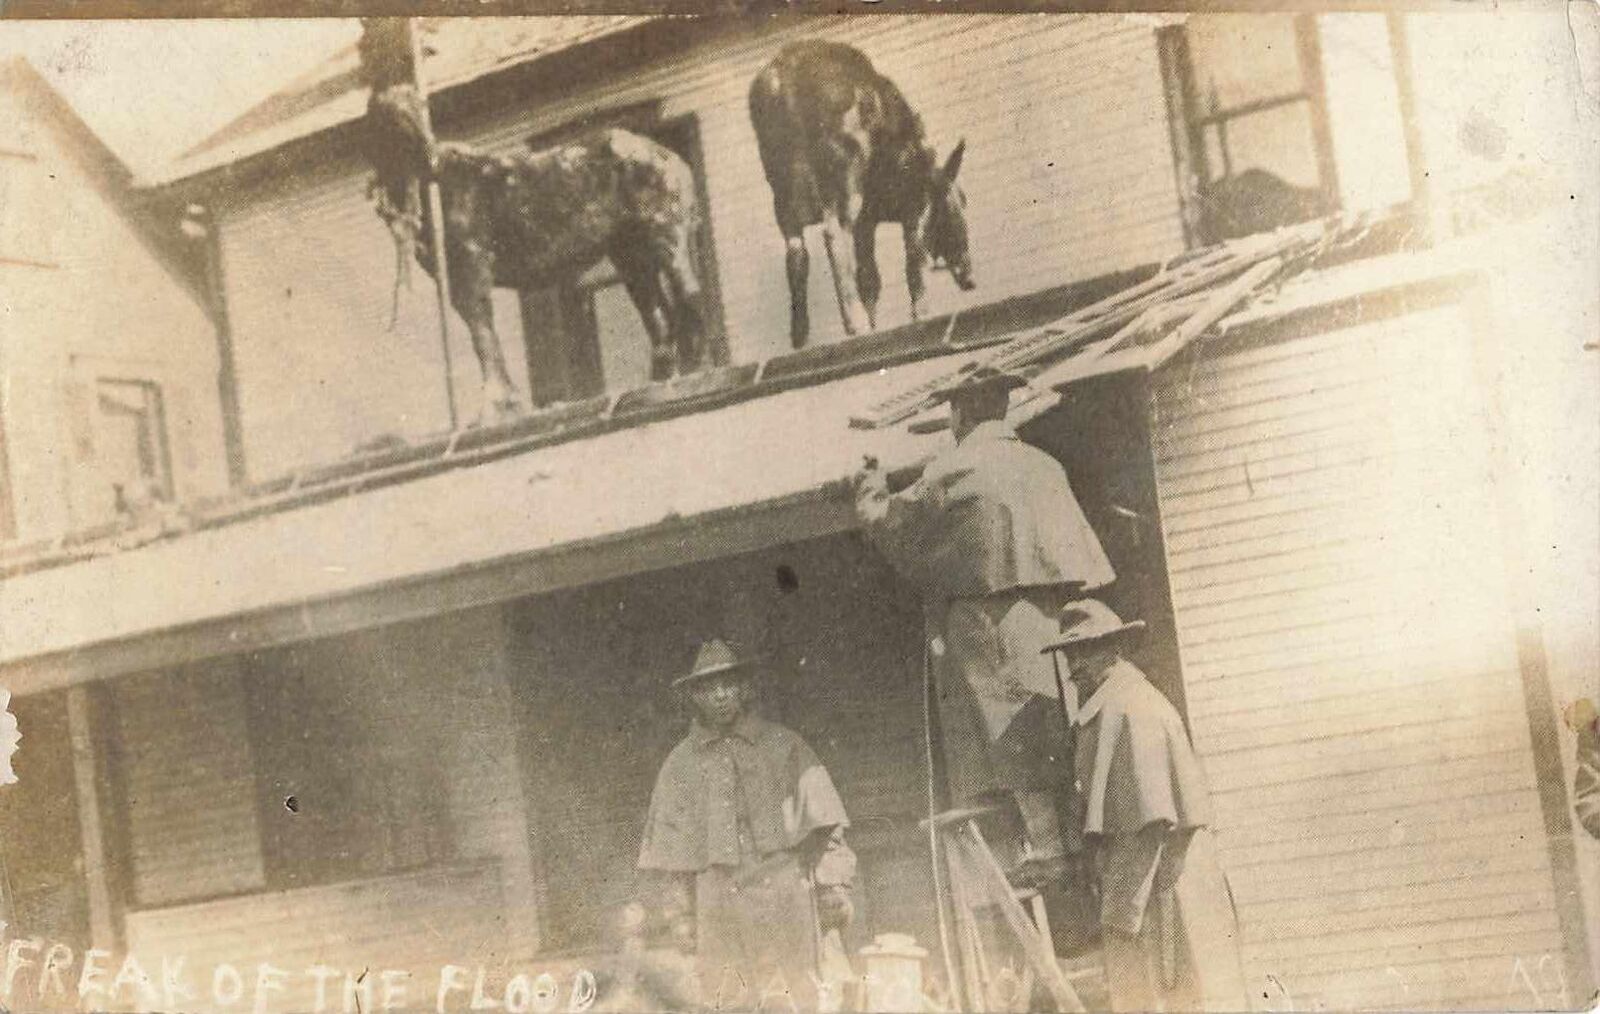 1913 Dayton Ohio Flood African American Black Soldiers Army Horses On Roof RARE